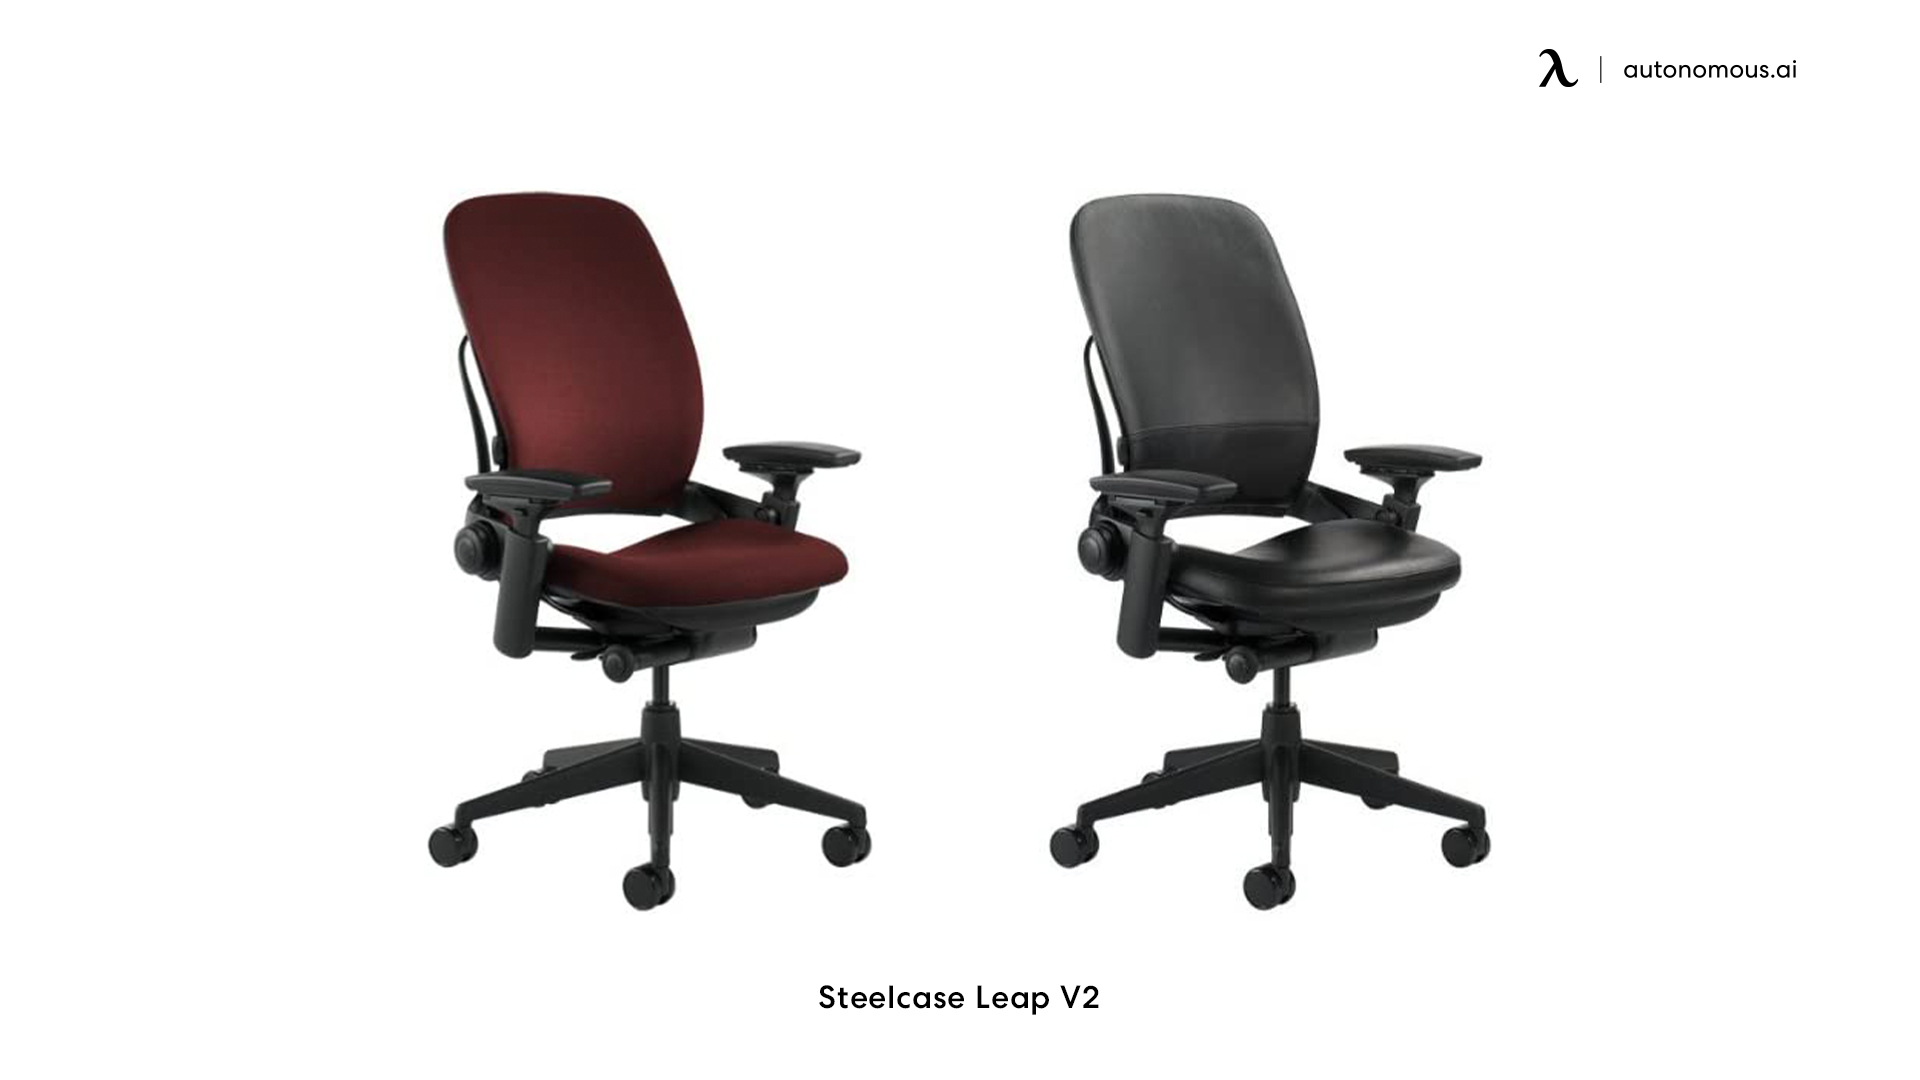 Ergonomic Chair by Steelcase Leap v2